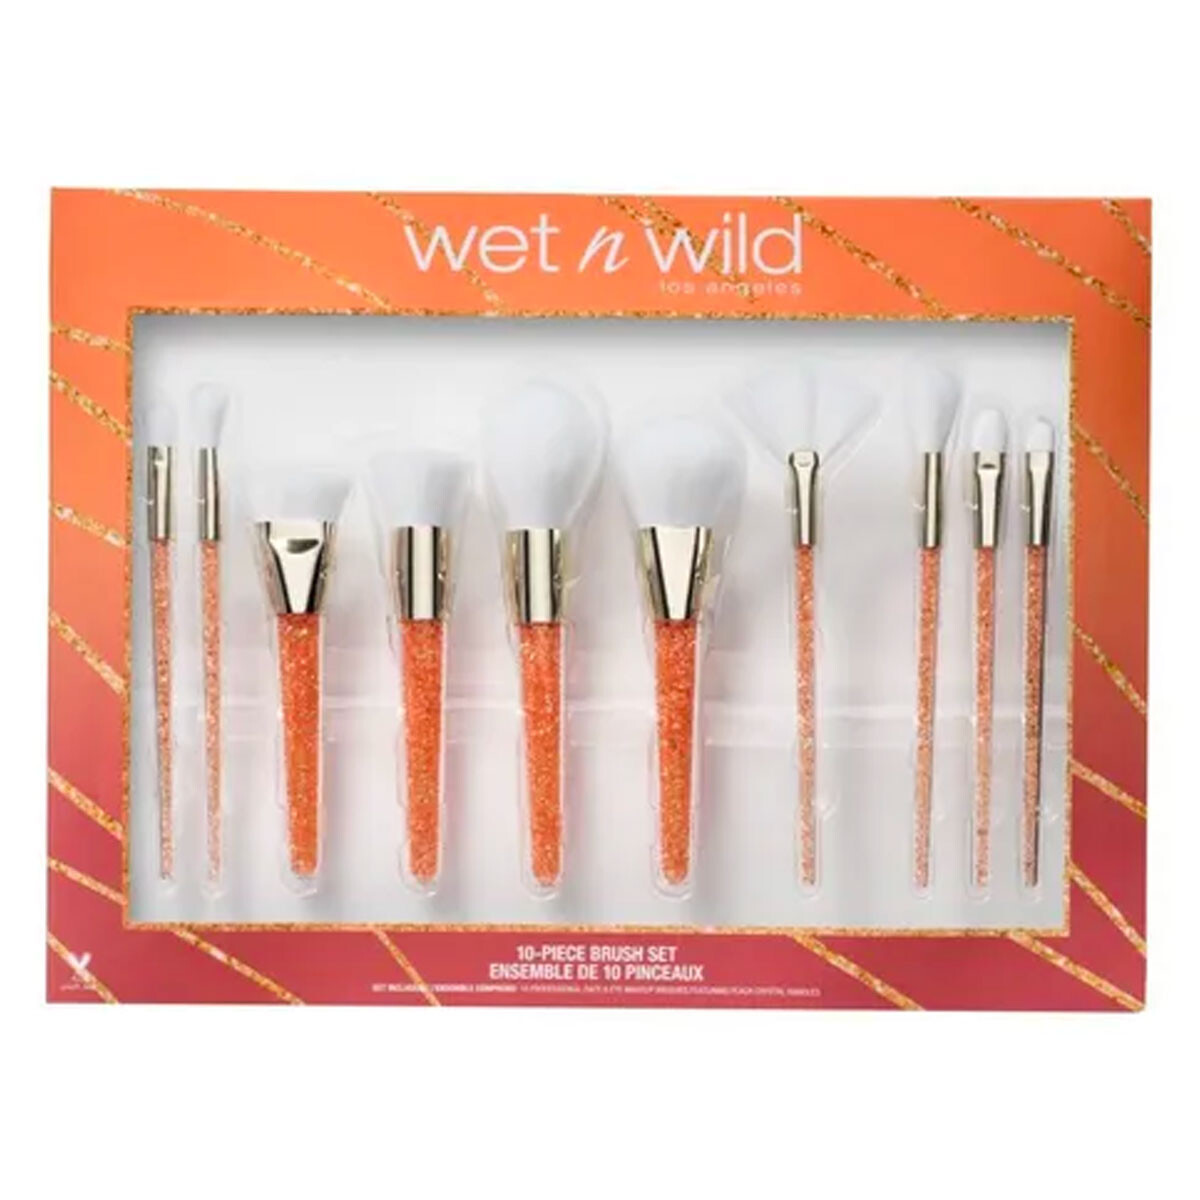 Set de 10 Brochas Wet N Wild Pro 10 Collection Set Holiday 2019 Limited Edition 